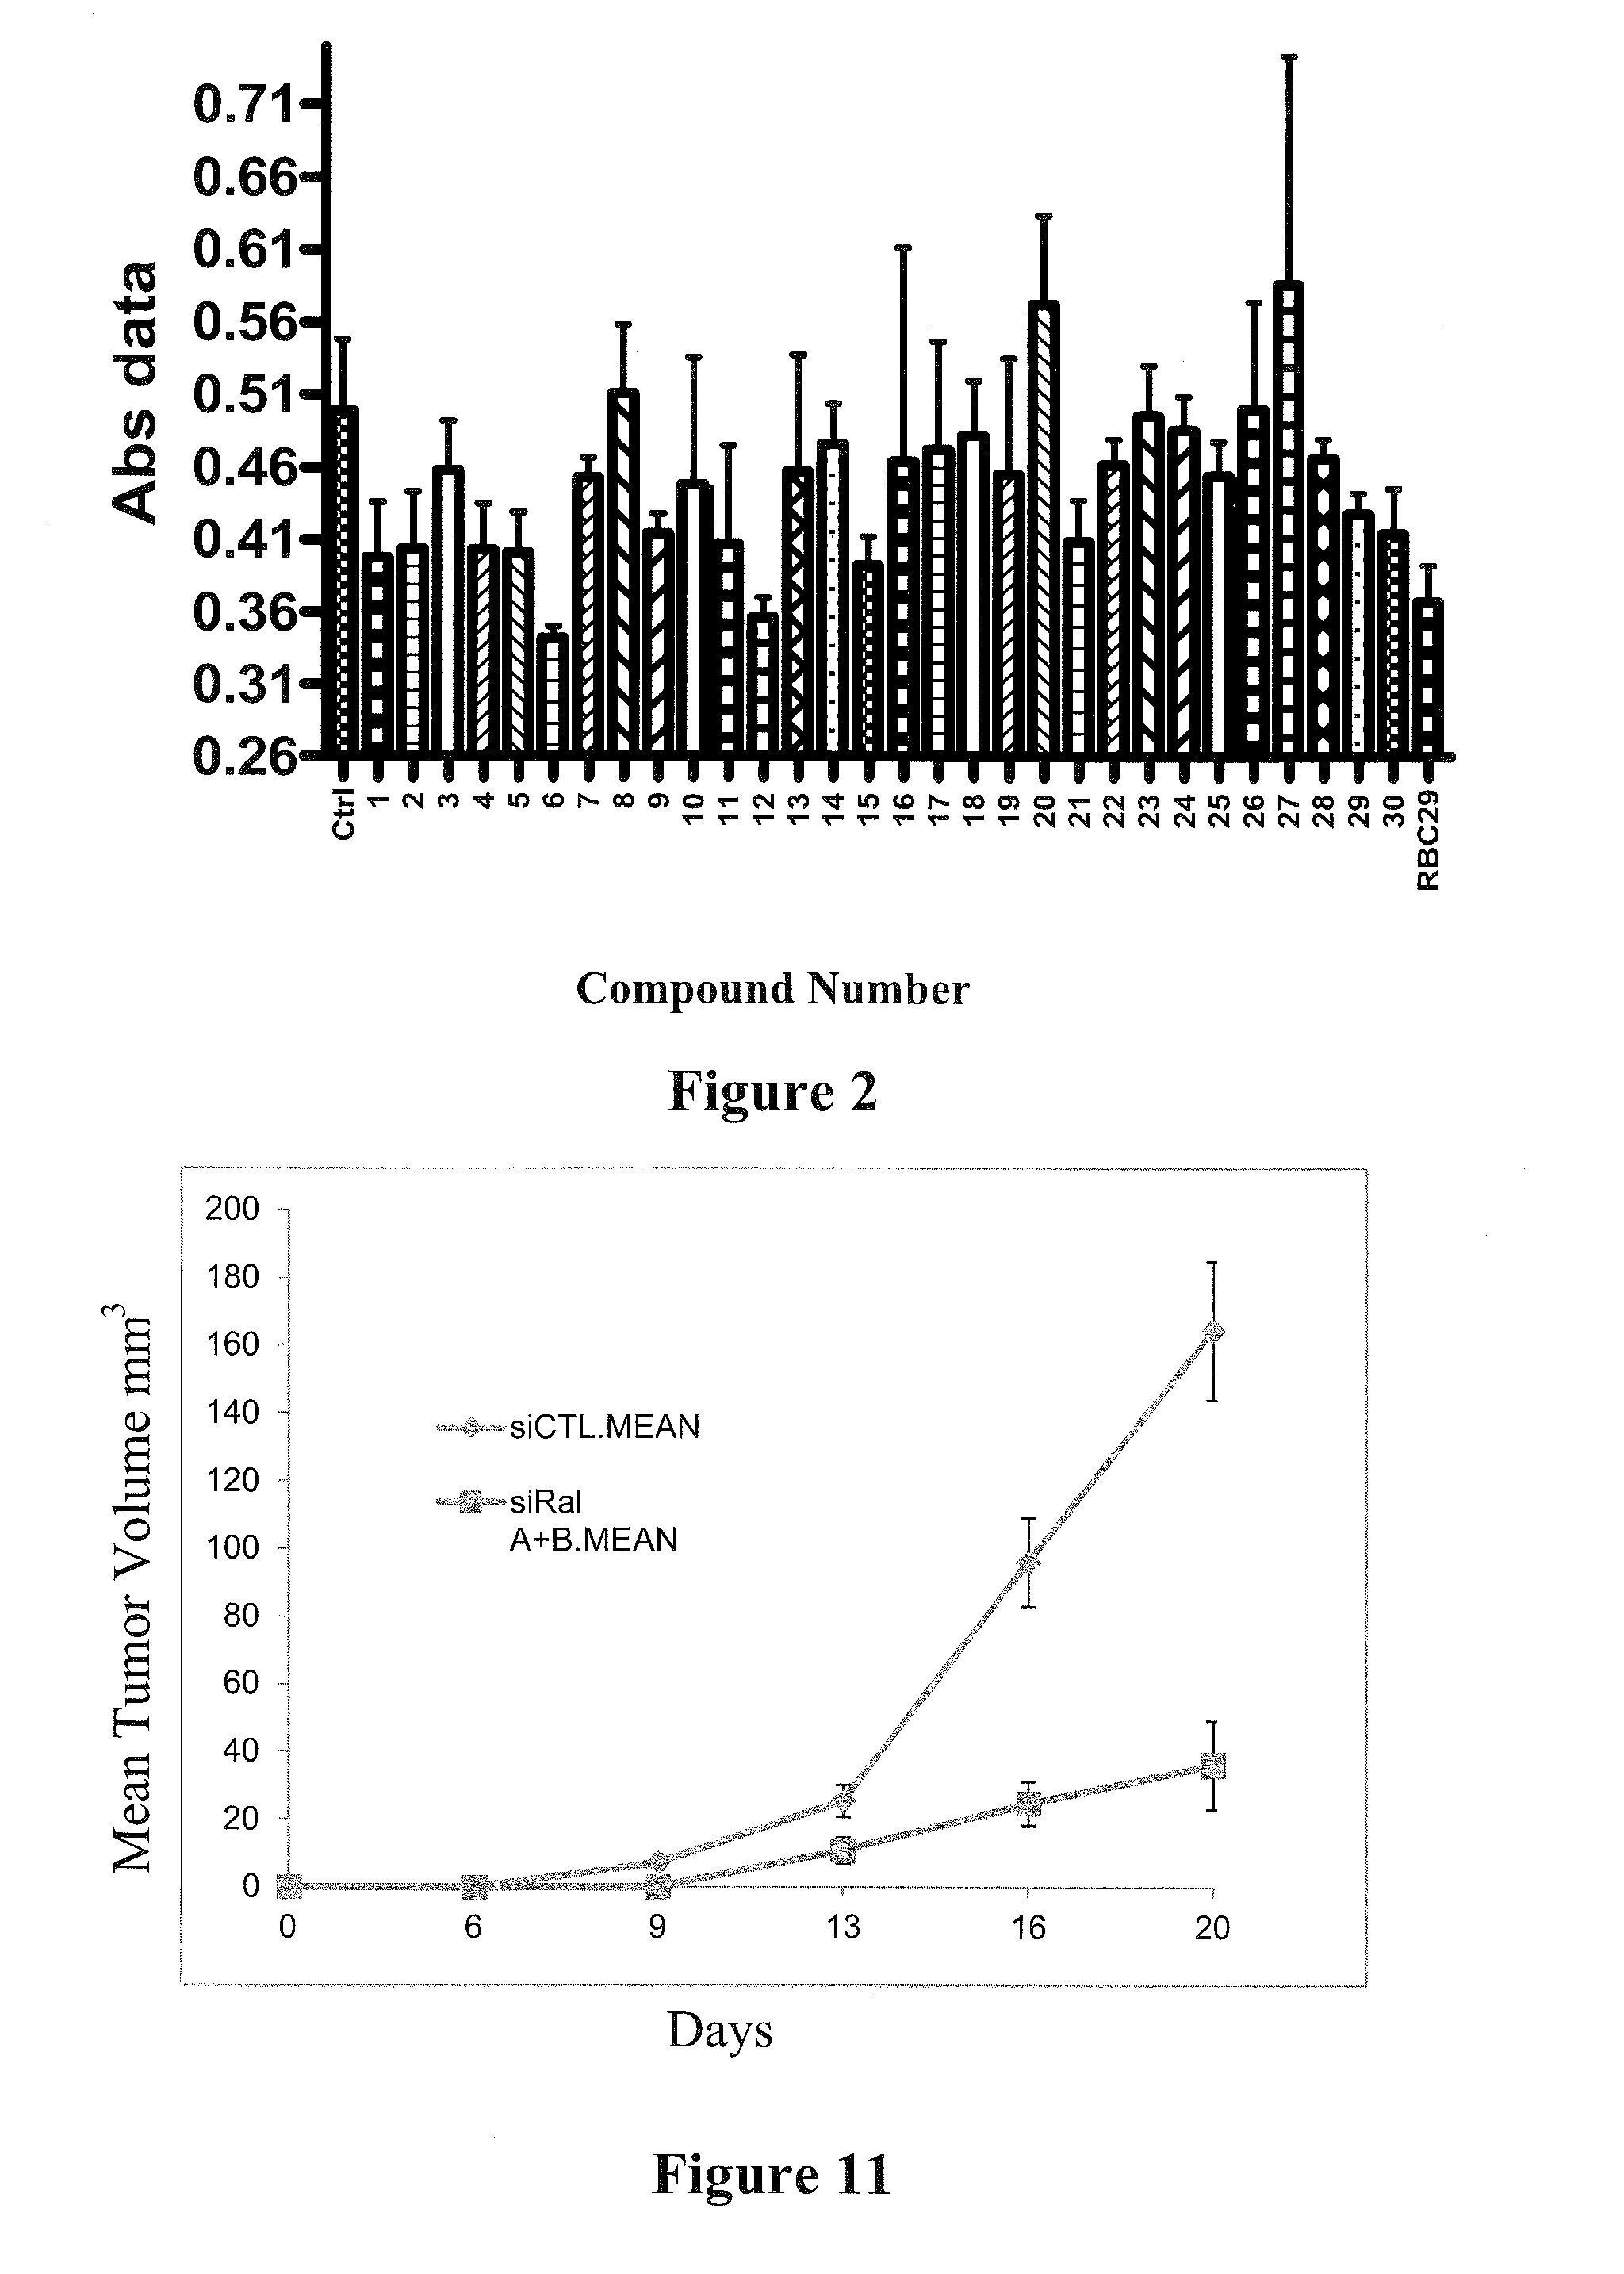 Anti-cancer compounds targeting Ral GTPases and methods of using the same